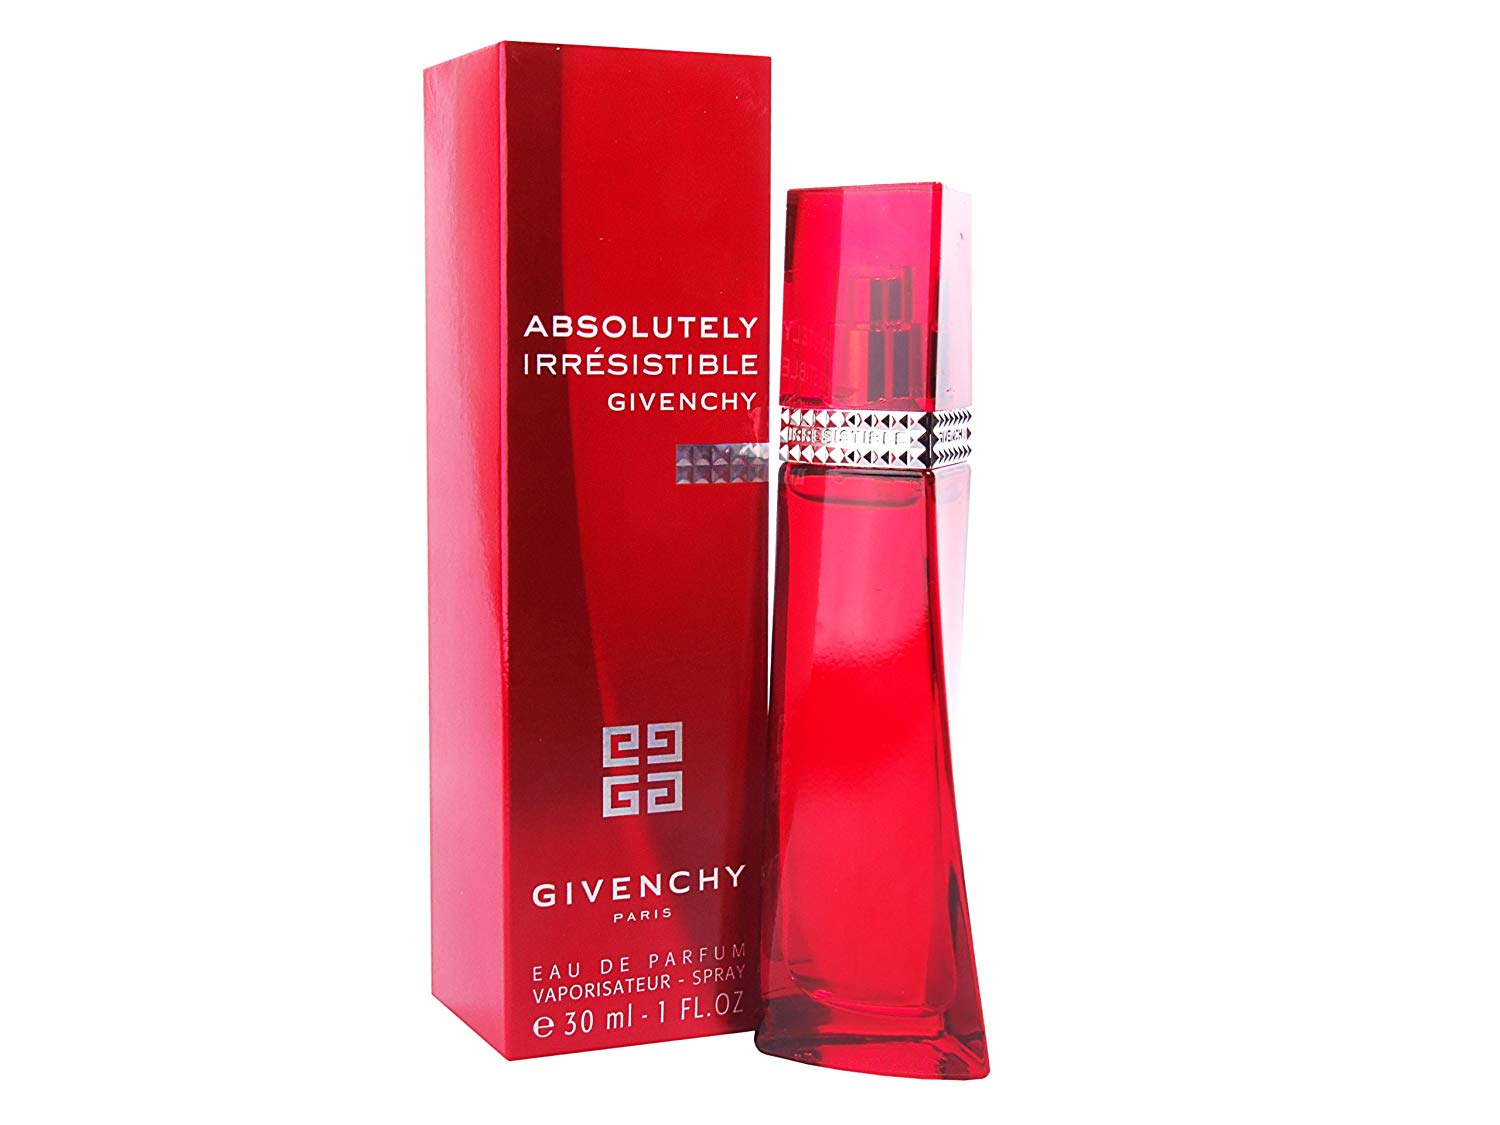 GIVENCHY ABSOLUTELY IRRESISTIBLE